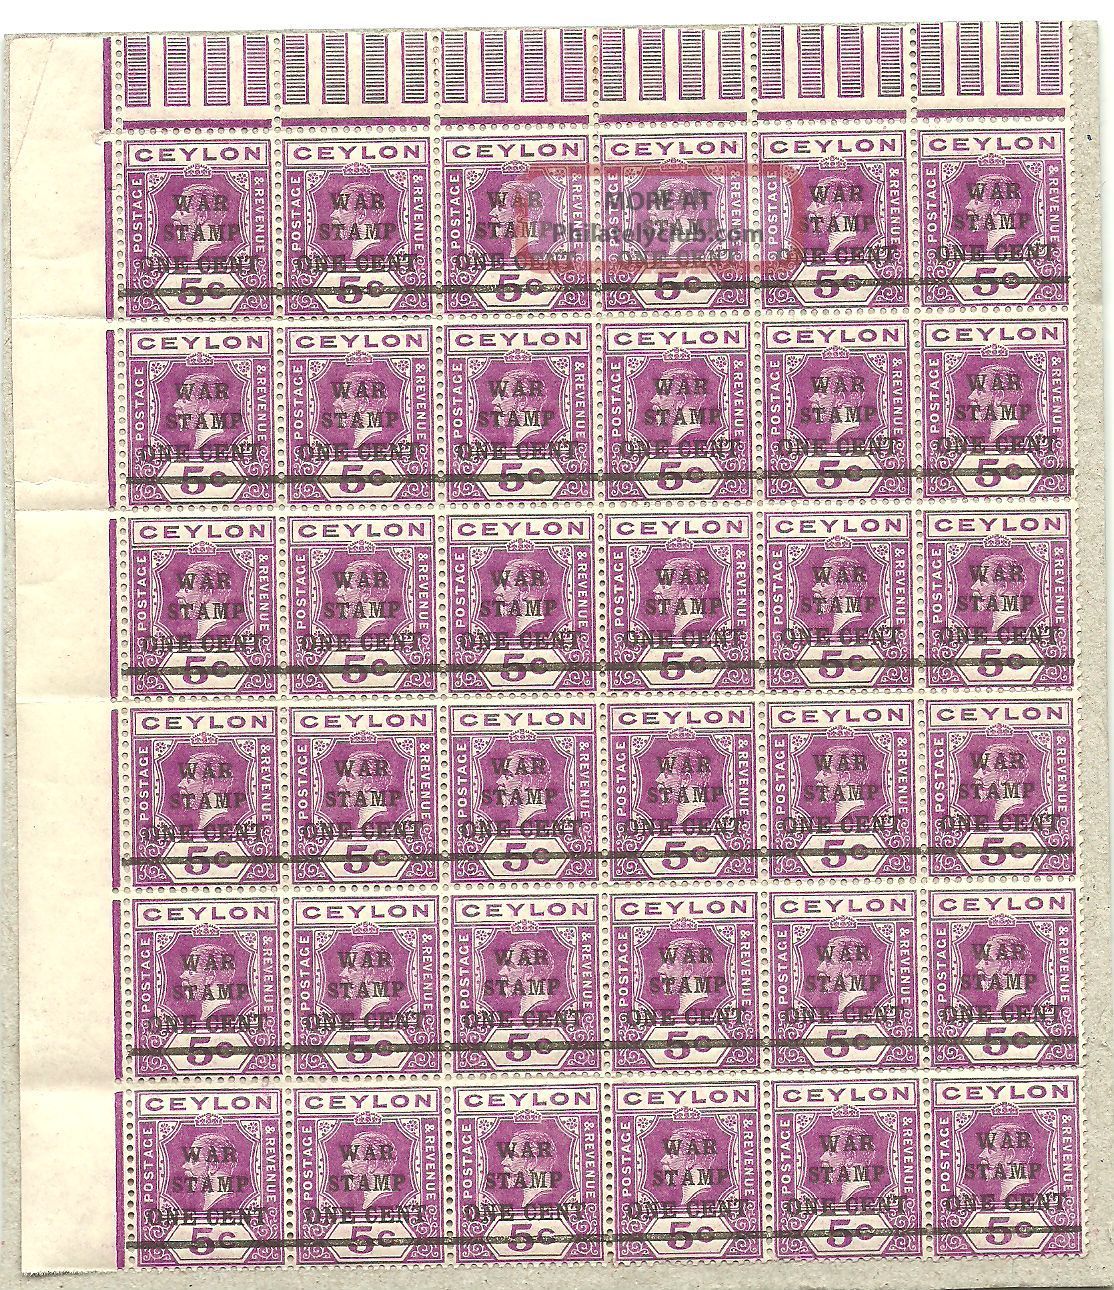 Ceylon Sg336 The 1918 - 9 One Cent On 5c War Stamp In A Block Of 36 C.  £117+ British Colonies & Territories photo